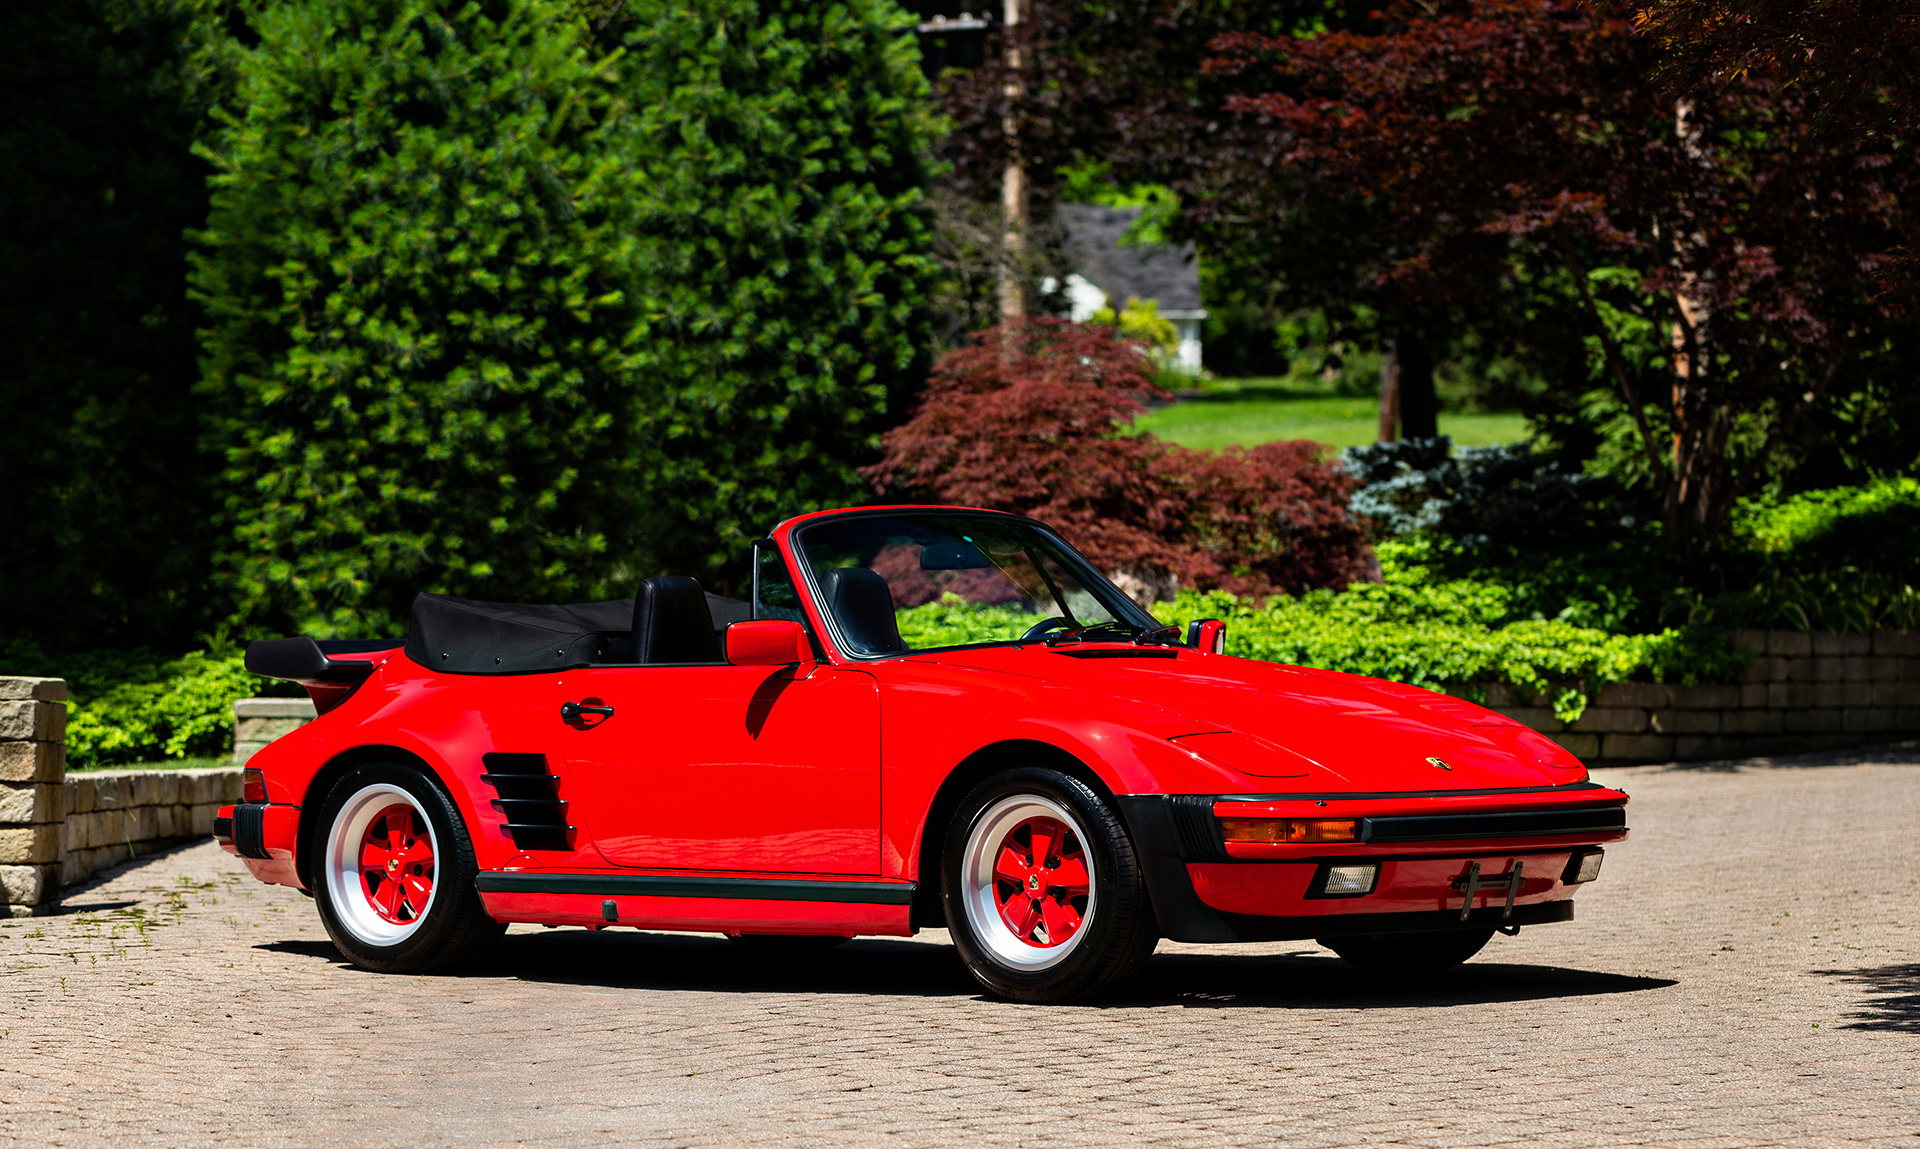 1988 Porsche 911 Turbo 'Flat-Nose' Cabriolet Offered at RM Sotheby's Monterey Live Auction 2021